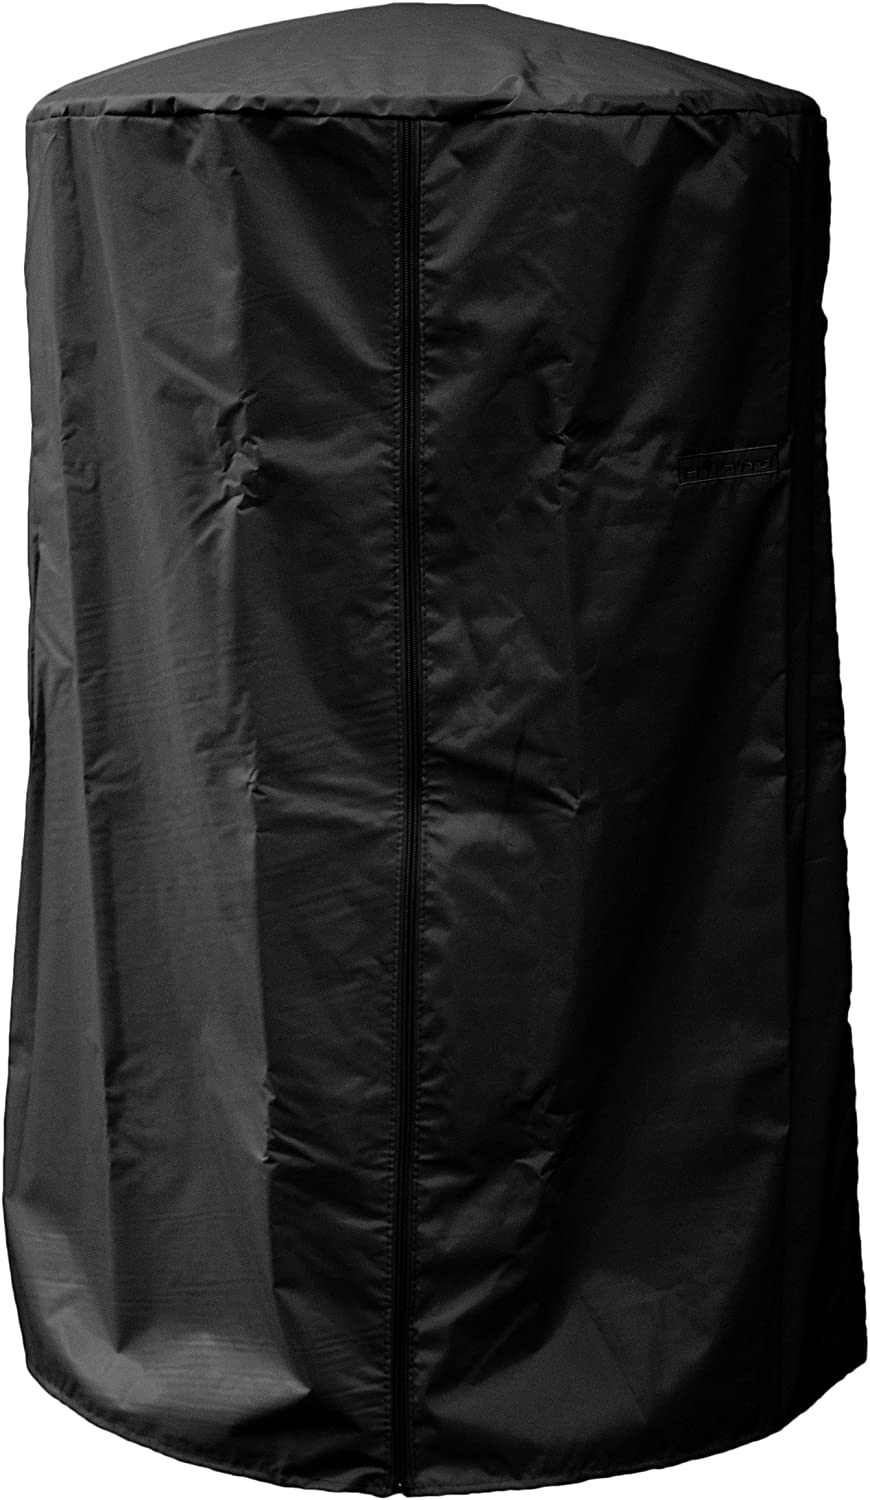 THXCO Patio Heater Covers Waterproof with Zipper and Adjustable Strap 420D Outdoor Heater Cover Storage Bag for Lawn Garden,Propane Heat Lamp Black Furniture Cover-89x33x19 inch 